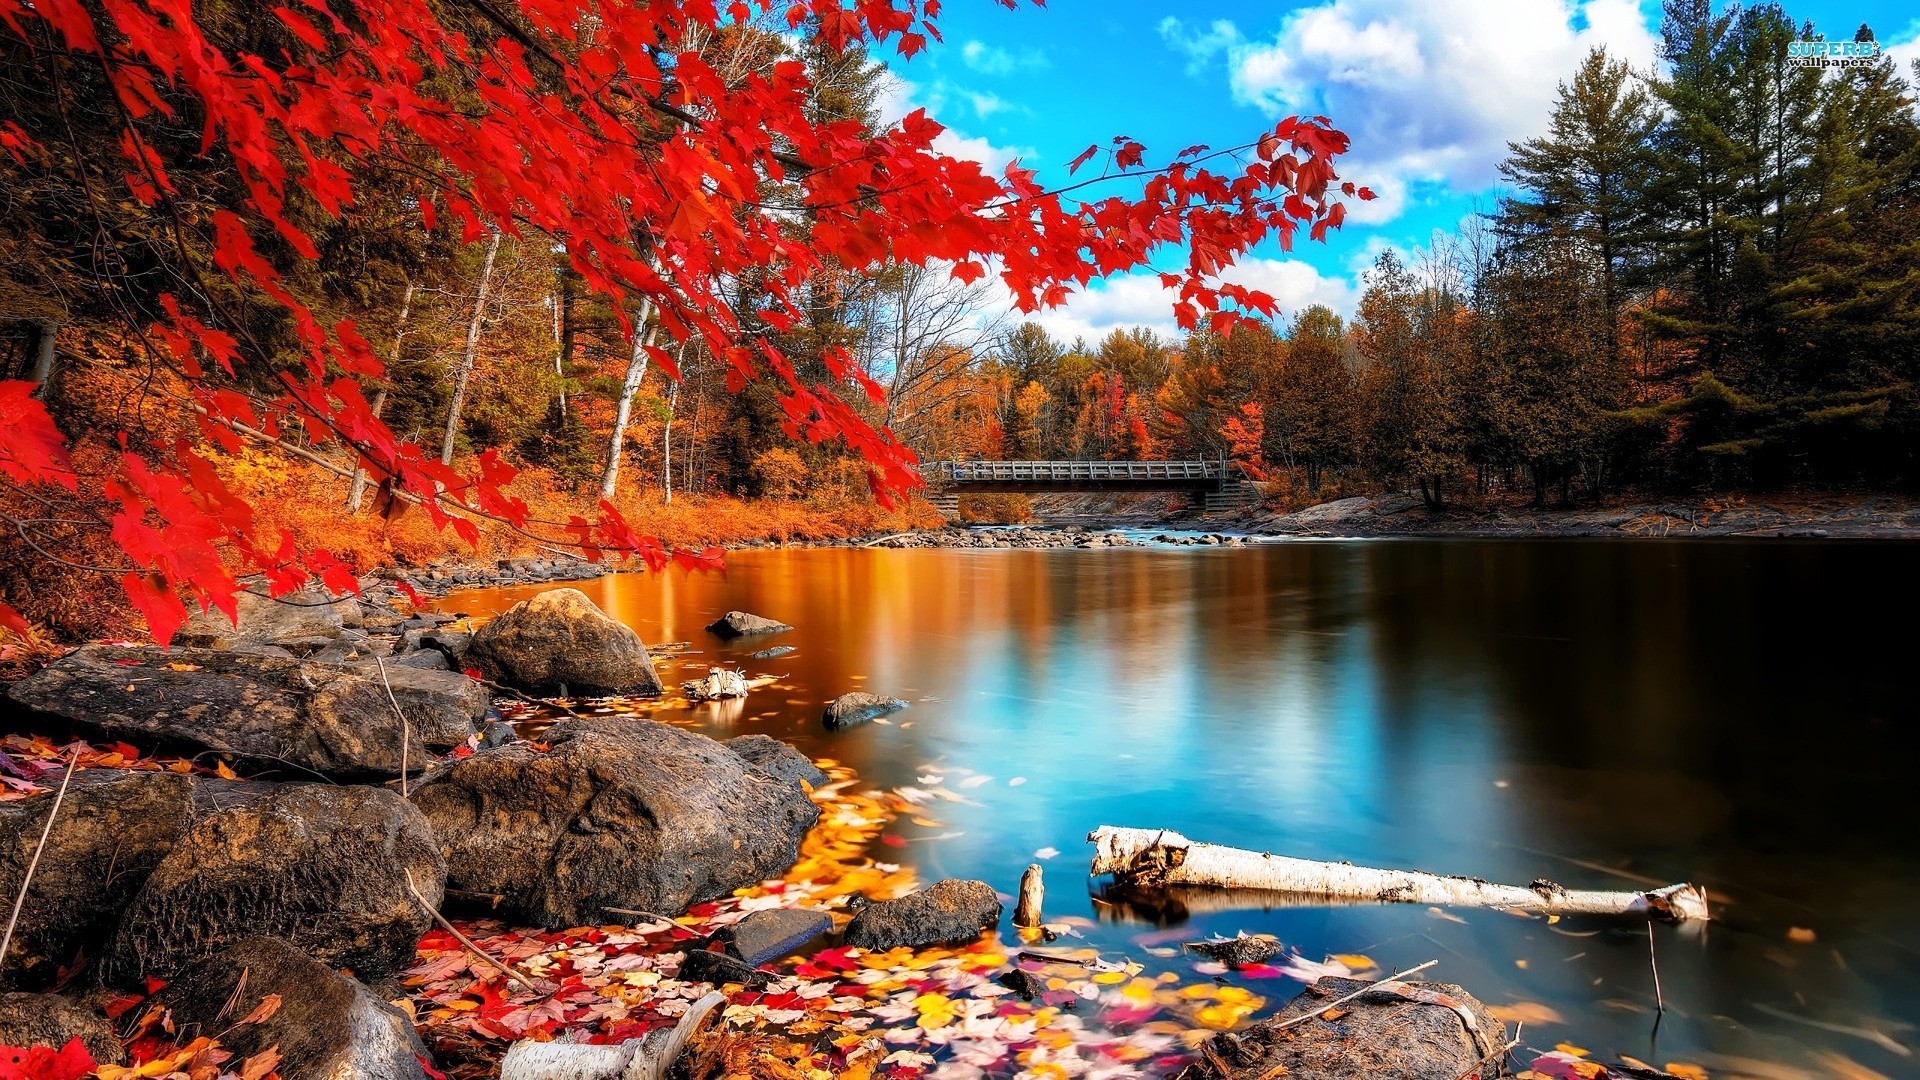 General 1920x1080 fall leaves nature landscape river